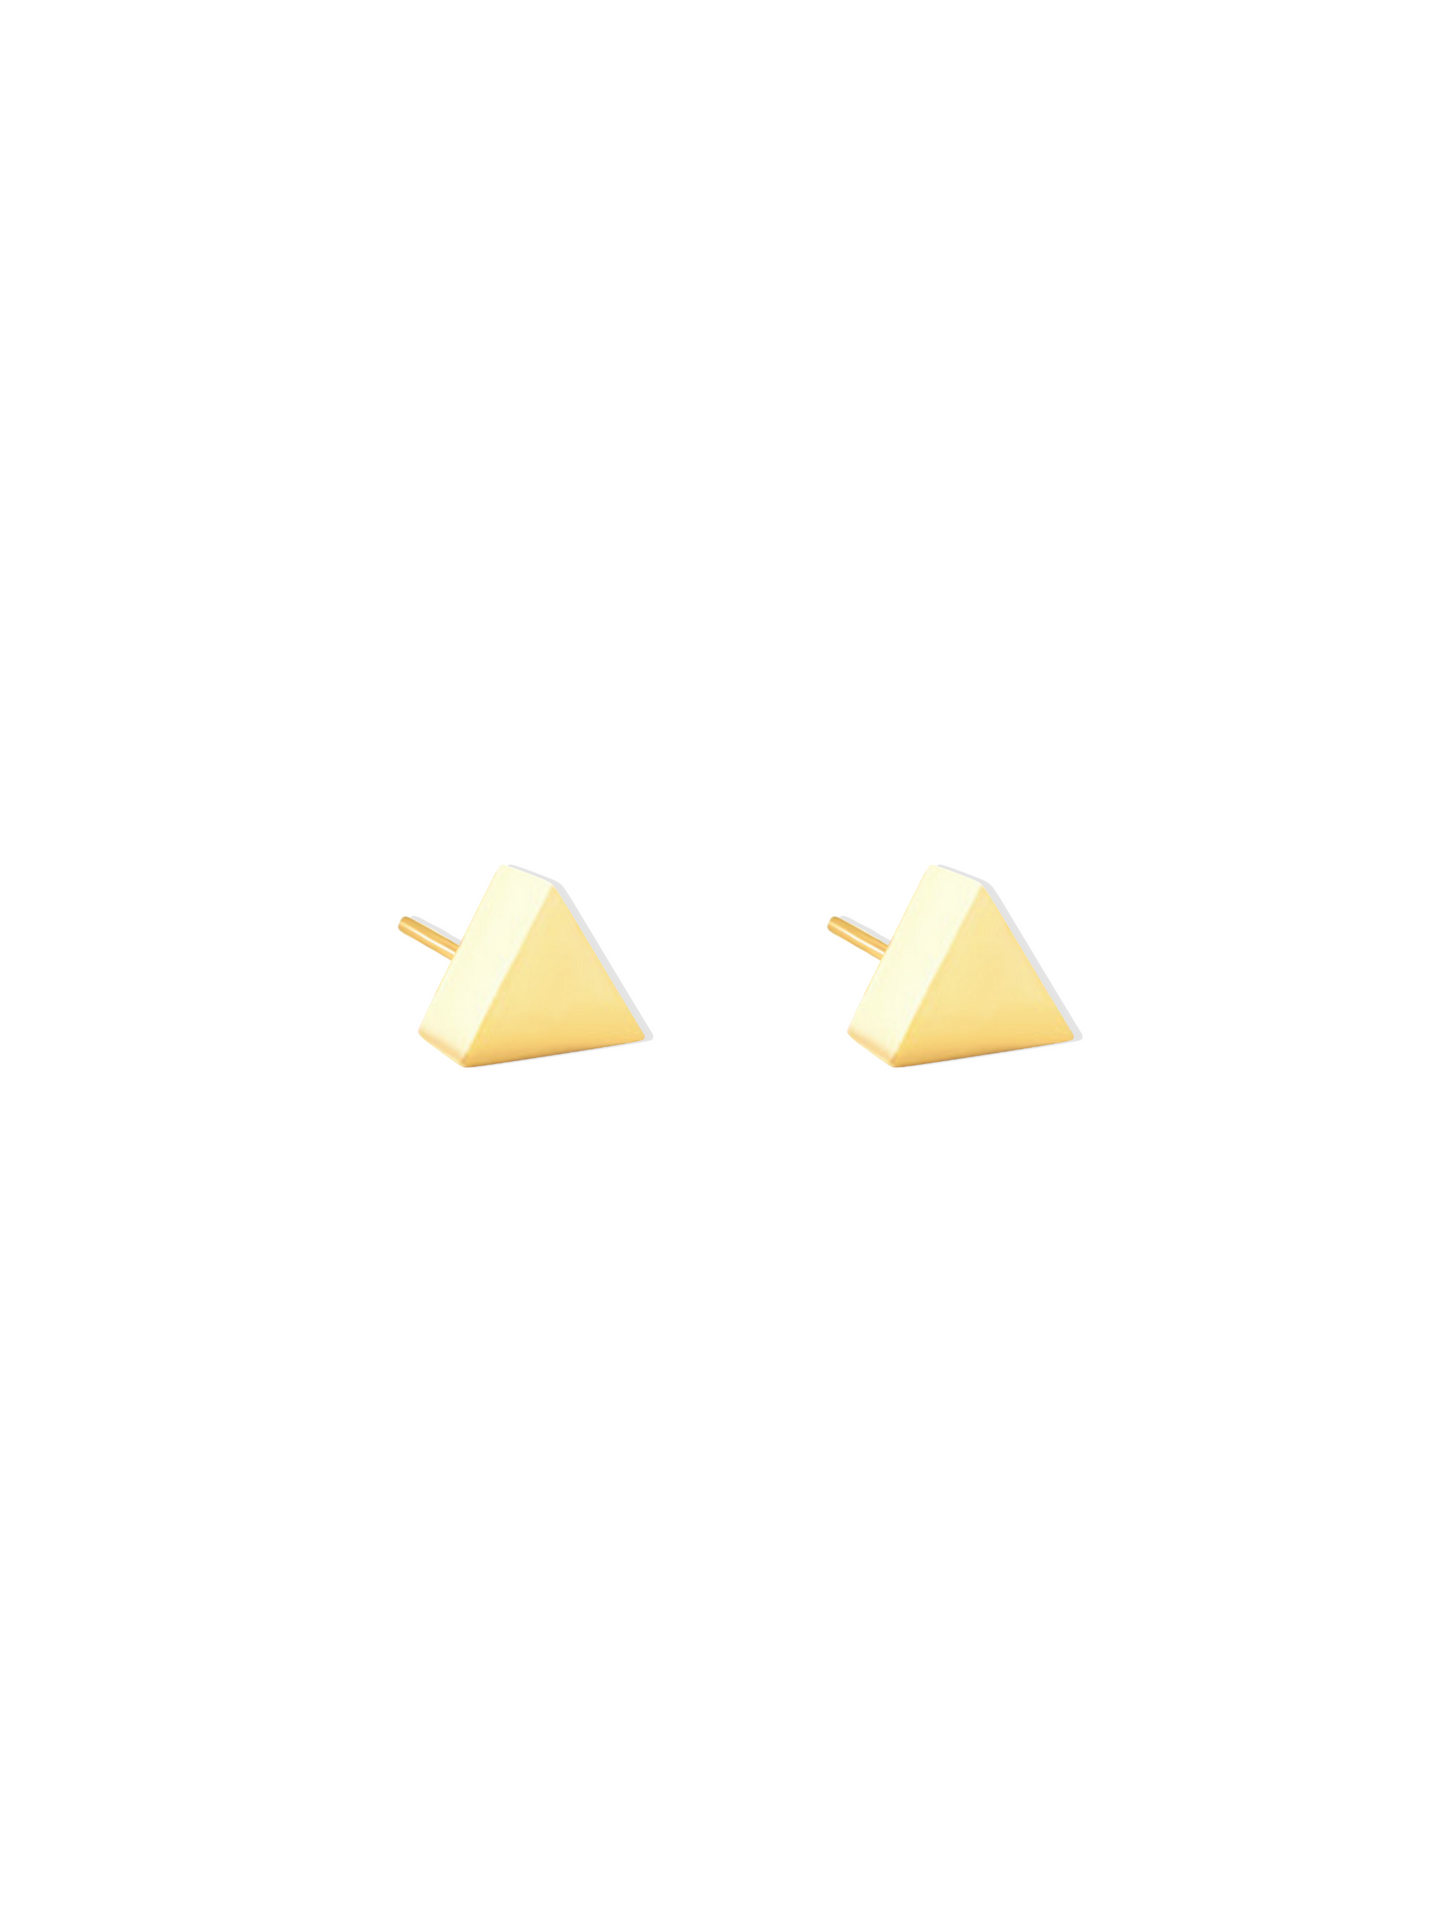 Golden steel earrings with smooth triangle